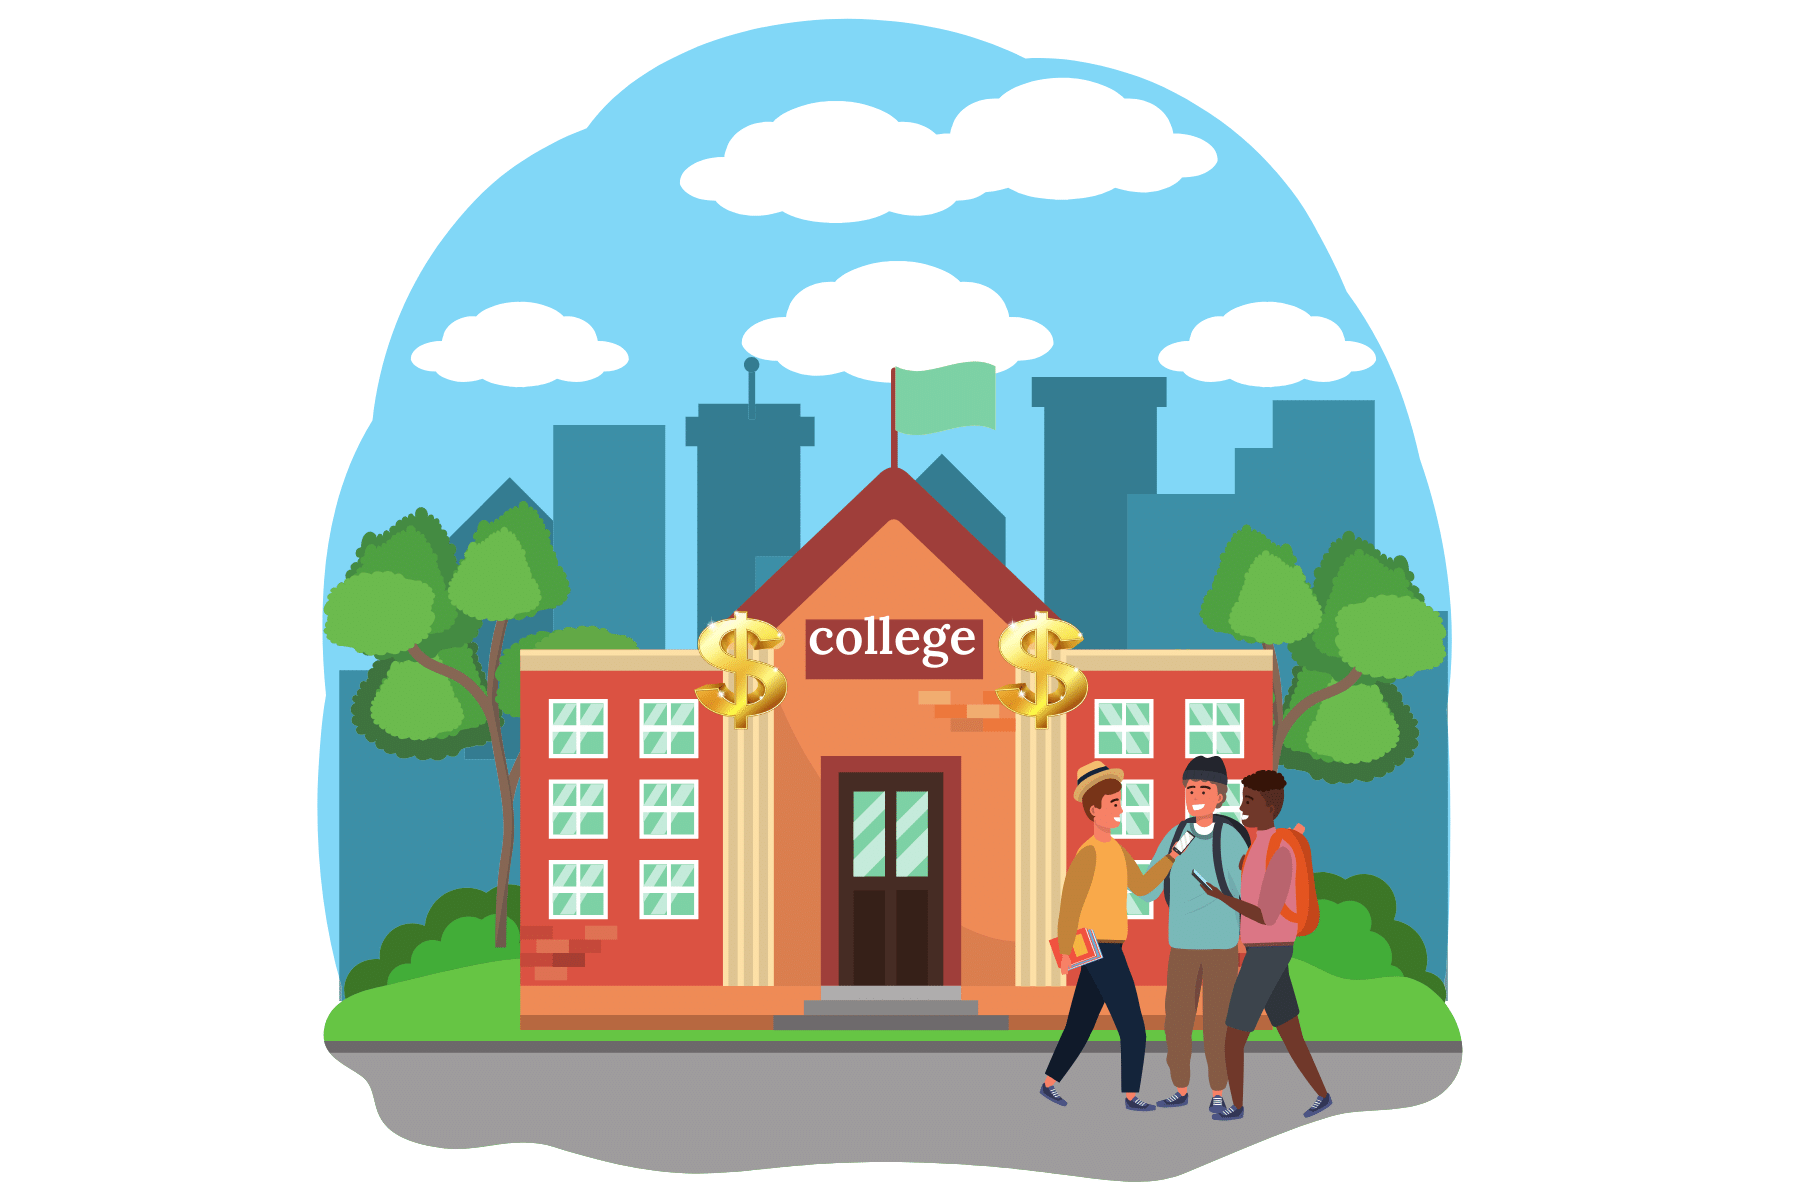 students outside of a building that says college on it with money signs on the front of the building